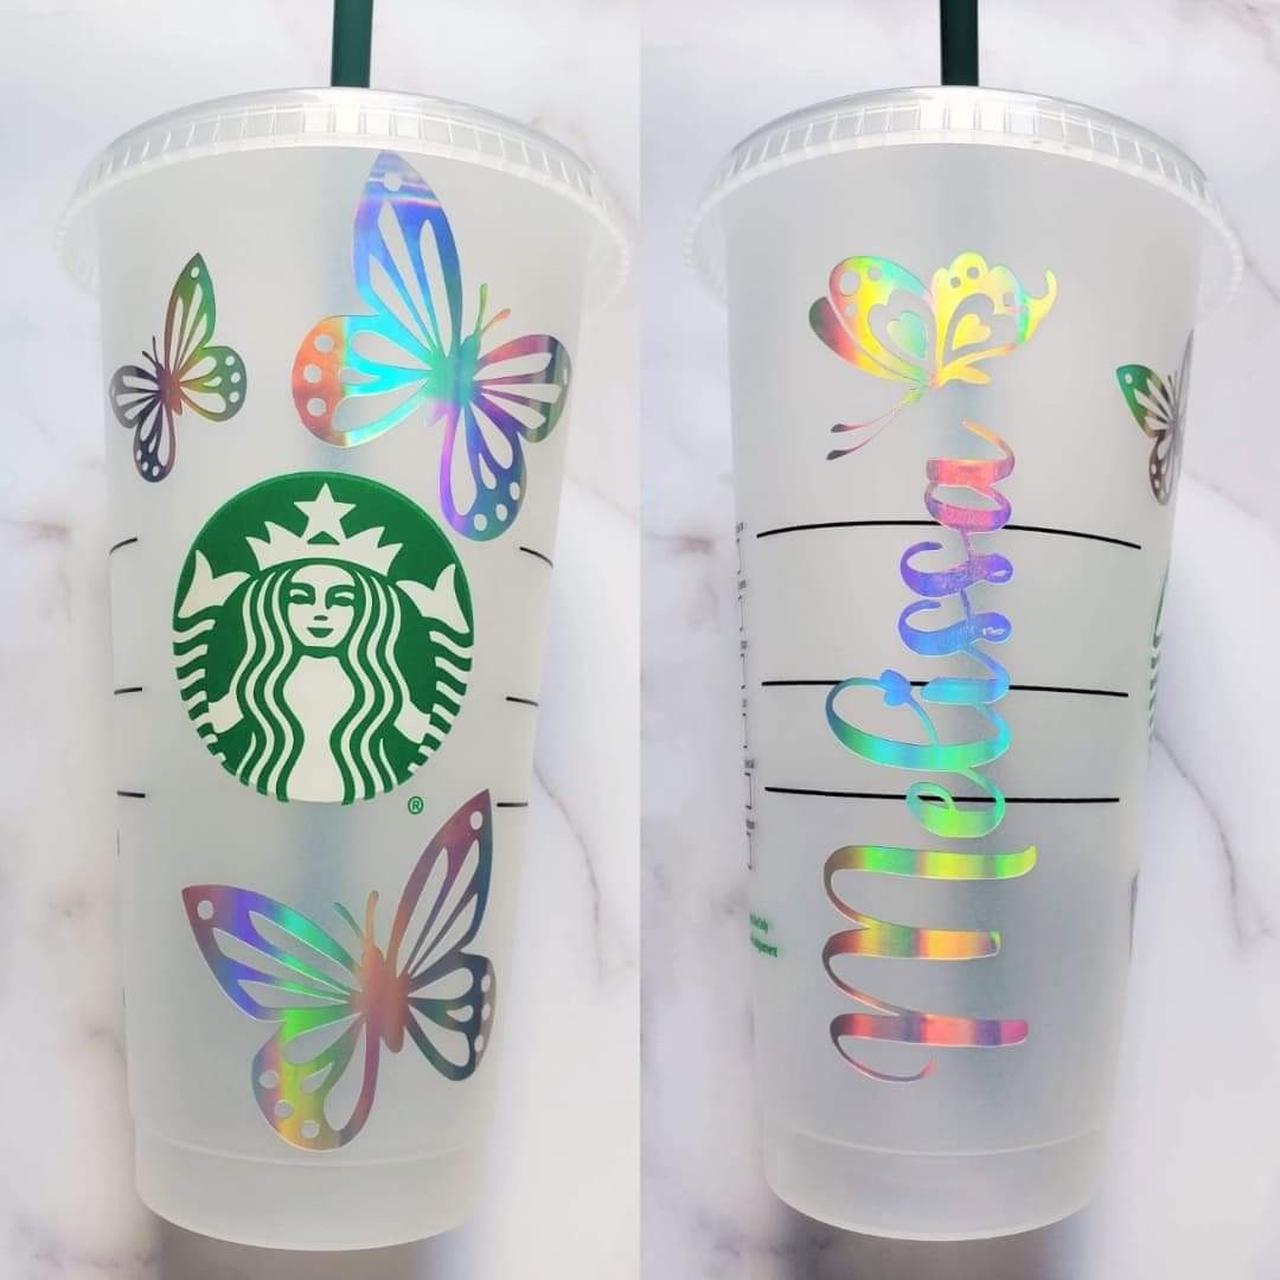 LV x Butterflies Custom Starbucks Cup 🦋💜 For pictures please follow us on  Instagram @dazzlemecups, By Dazzle Me Cups